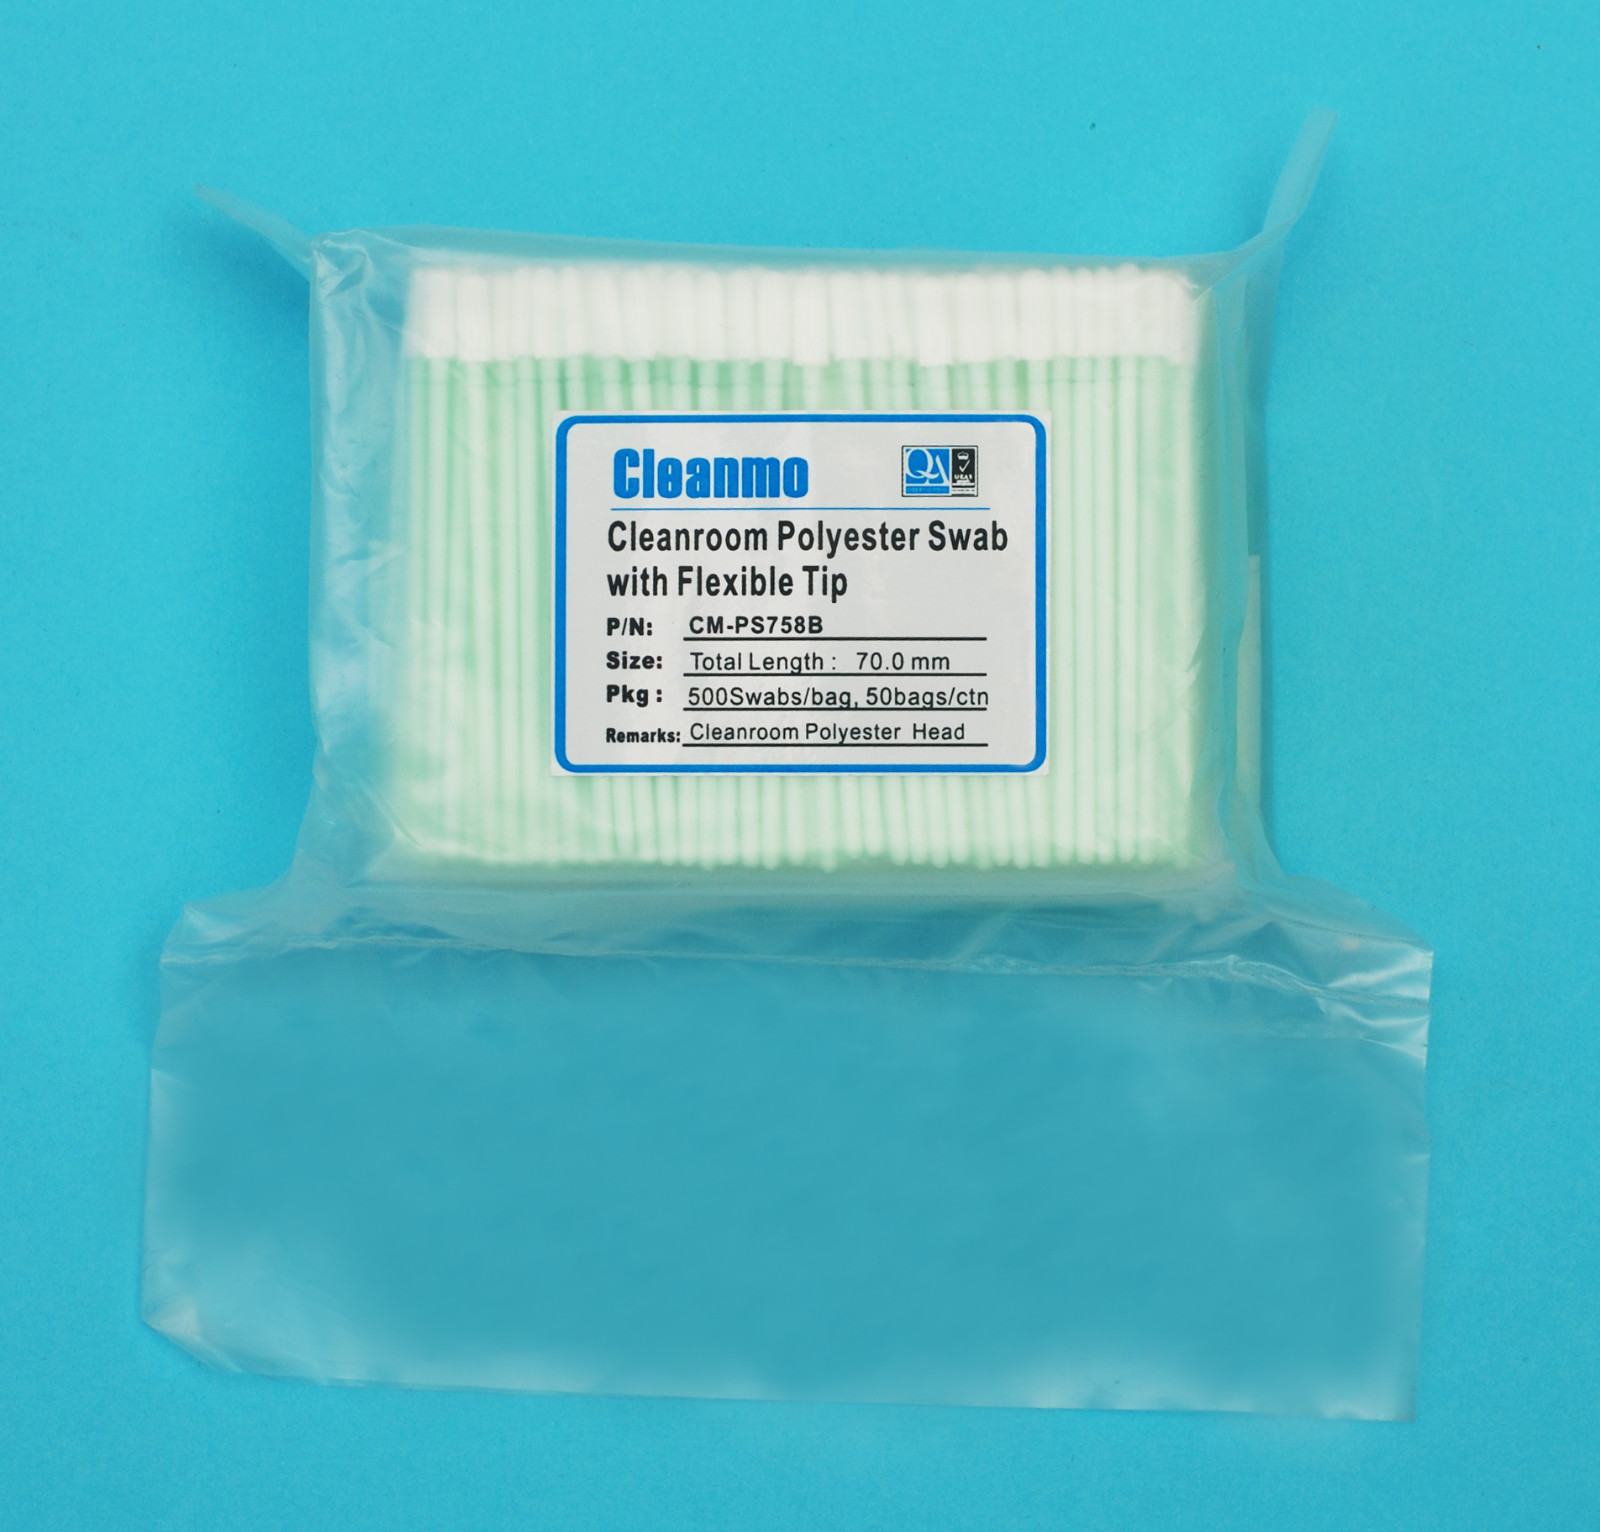 Cleanmo compatible dacron polyester swabs manufacturer for microscopes-5